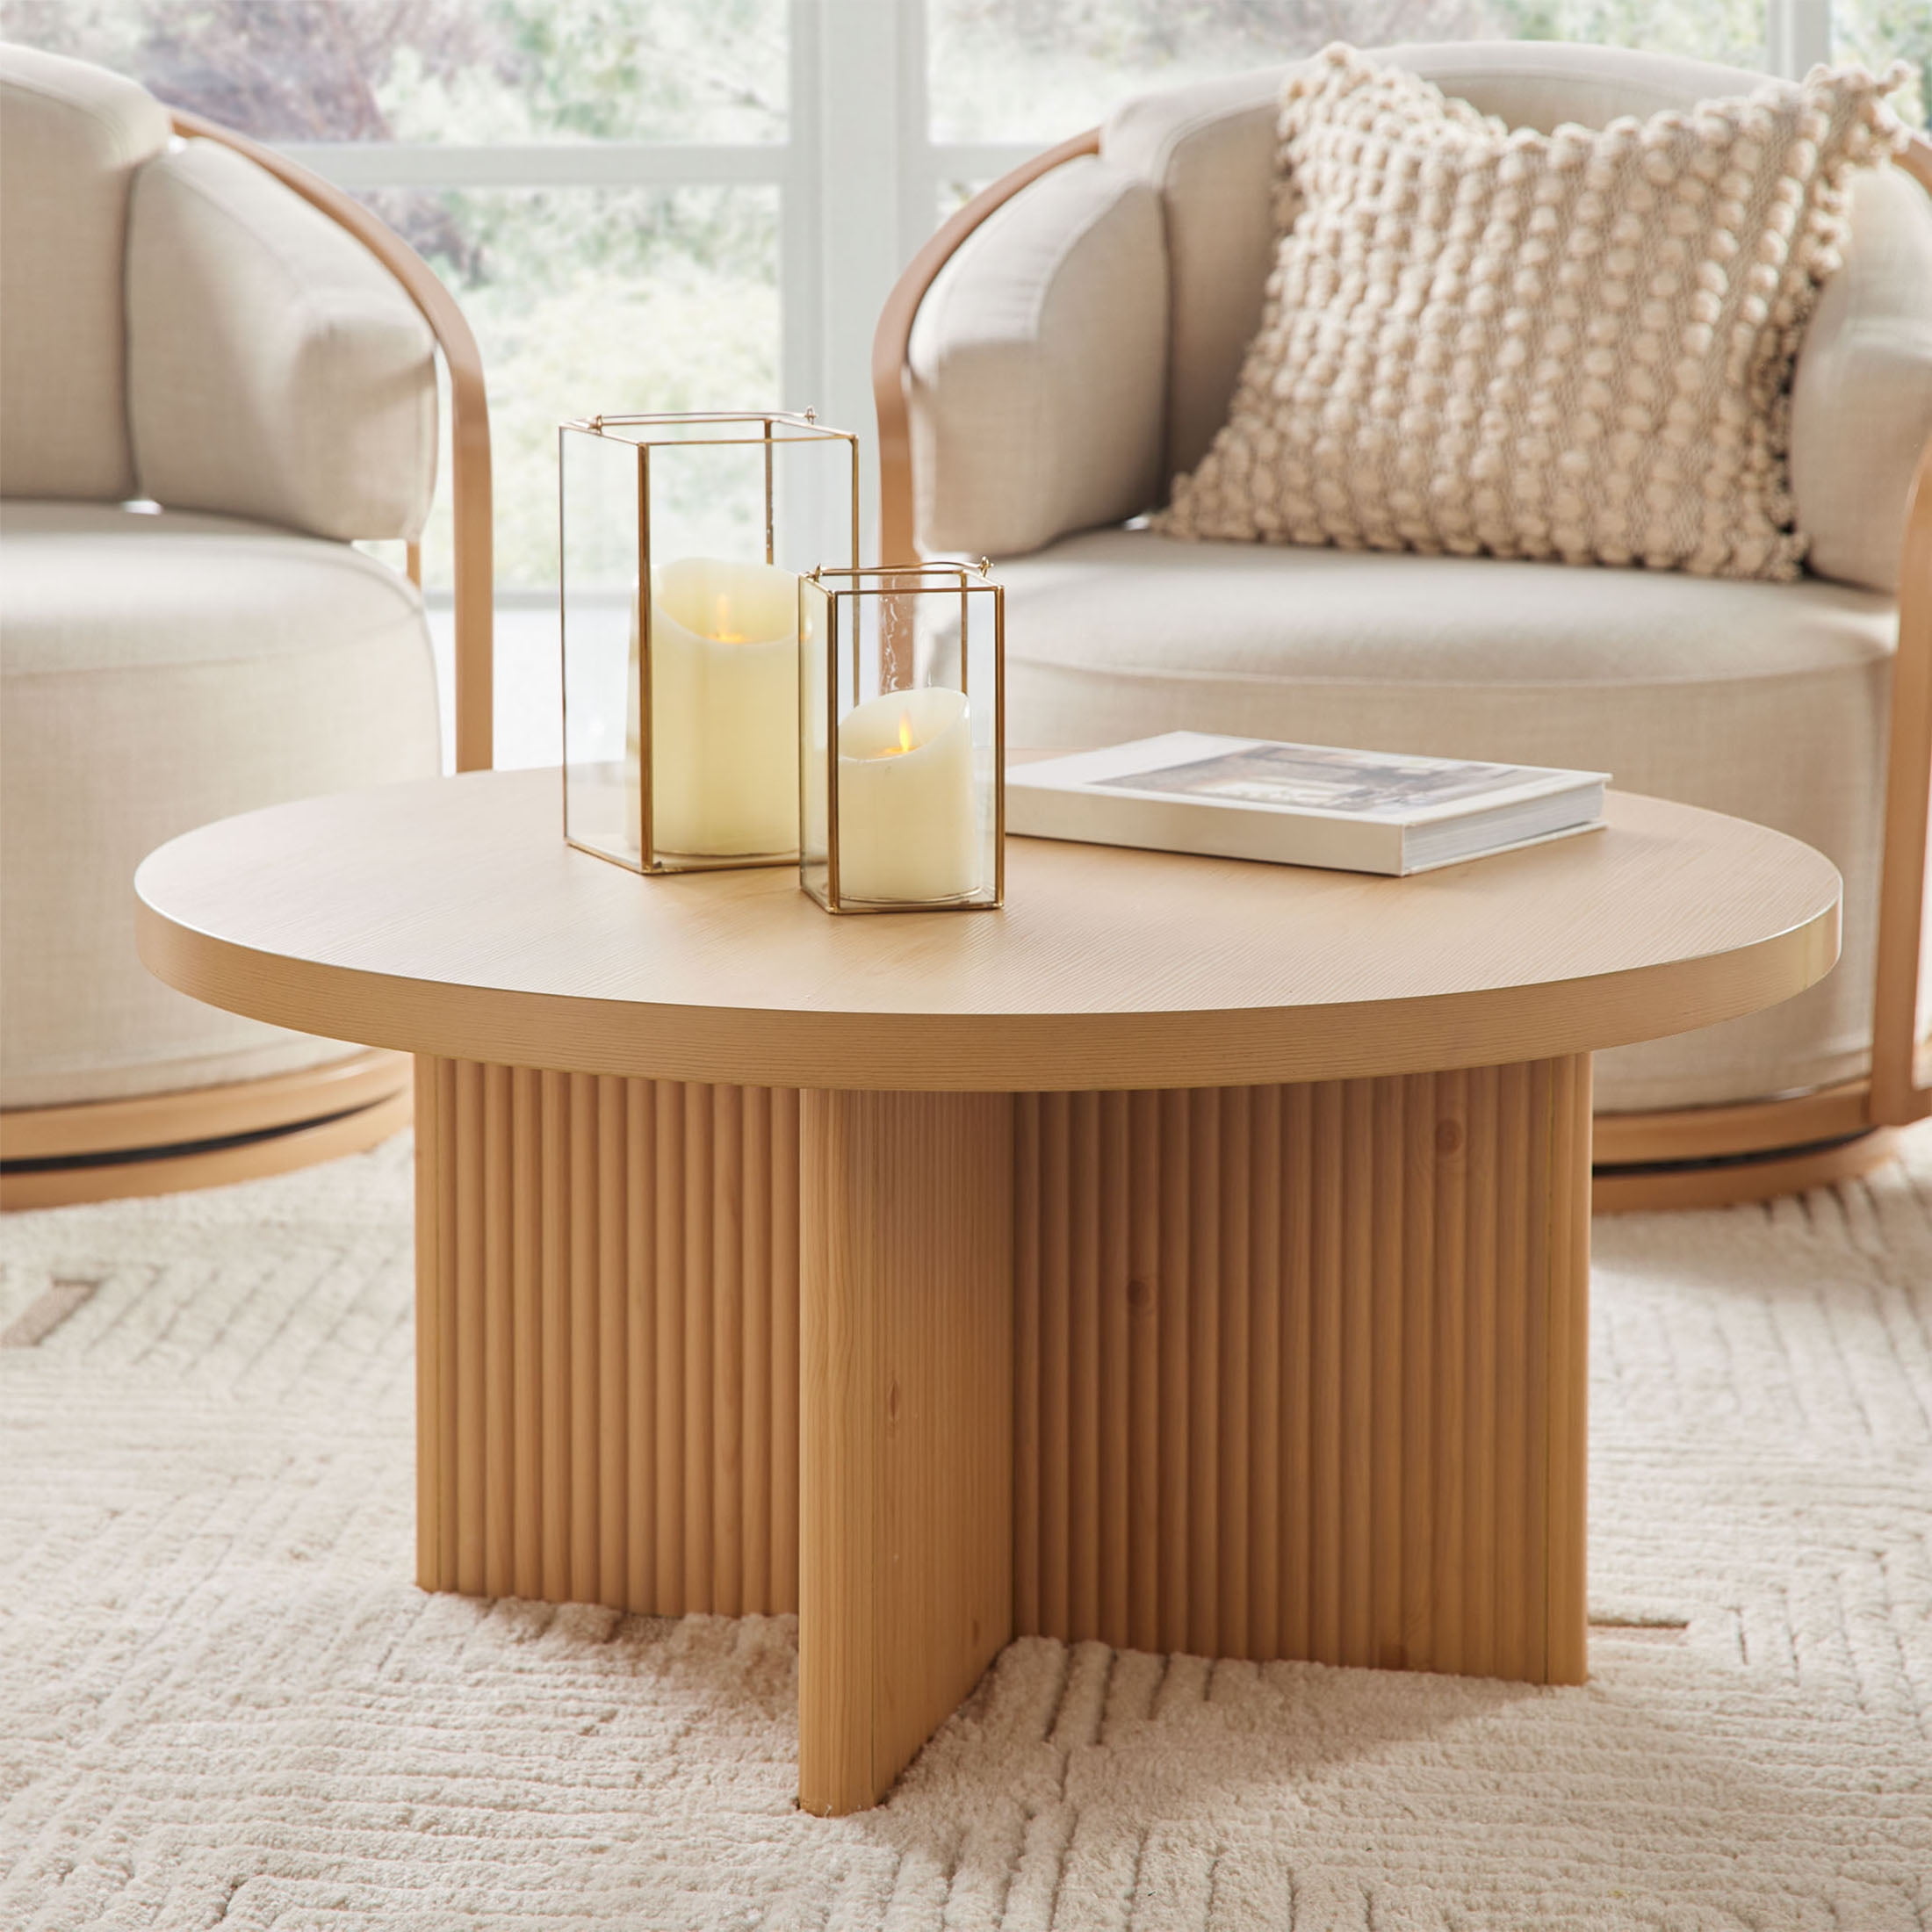 Better Homes & Gardens Lillian Fluted Coffee Table, Natural Pine Finish - Walmart.com